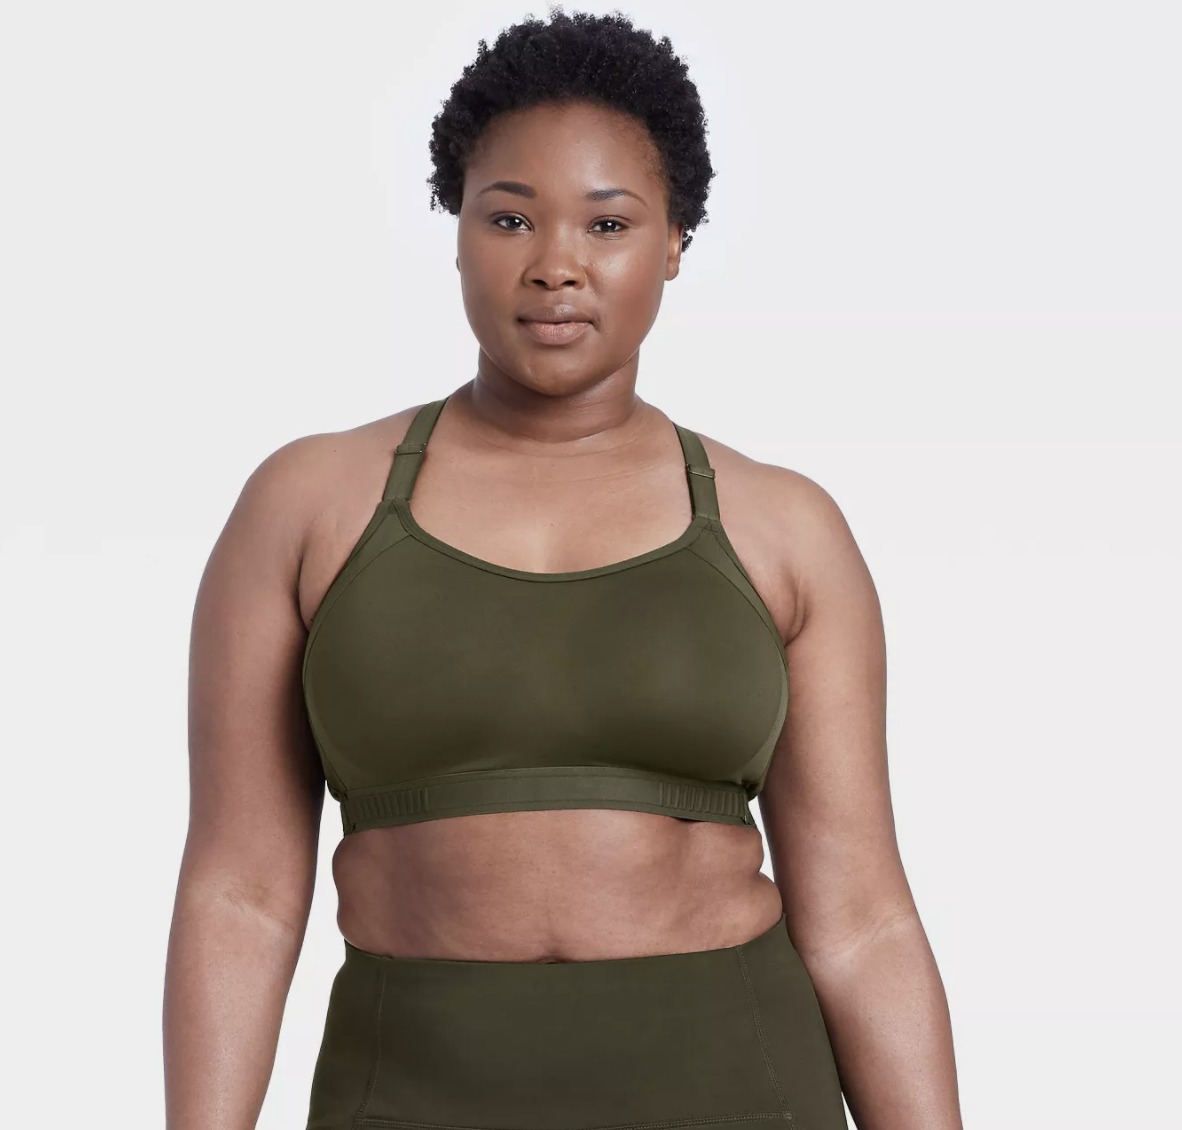 Model is wearing a forest green sports bra and matching leggings